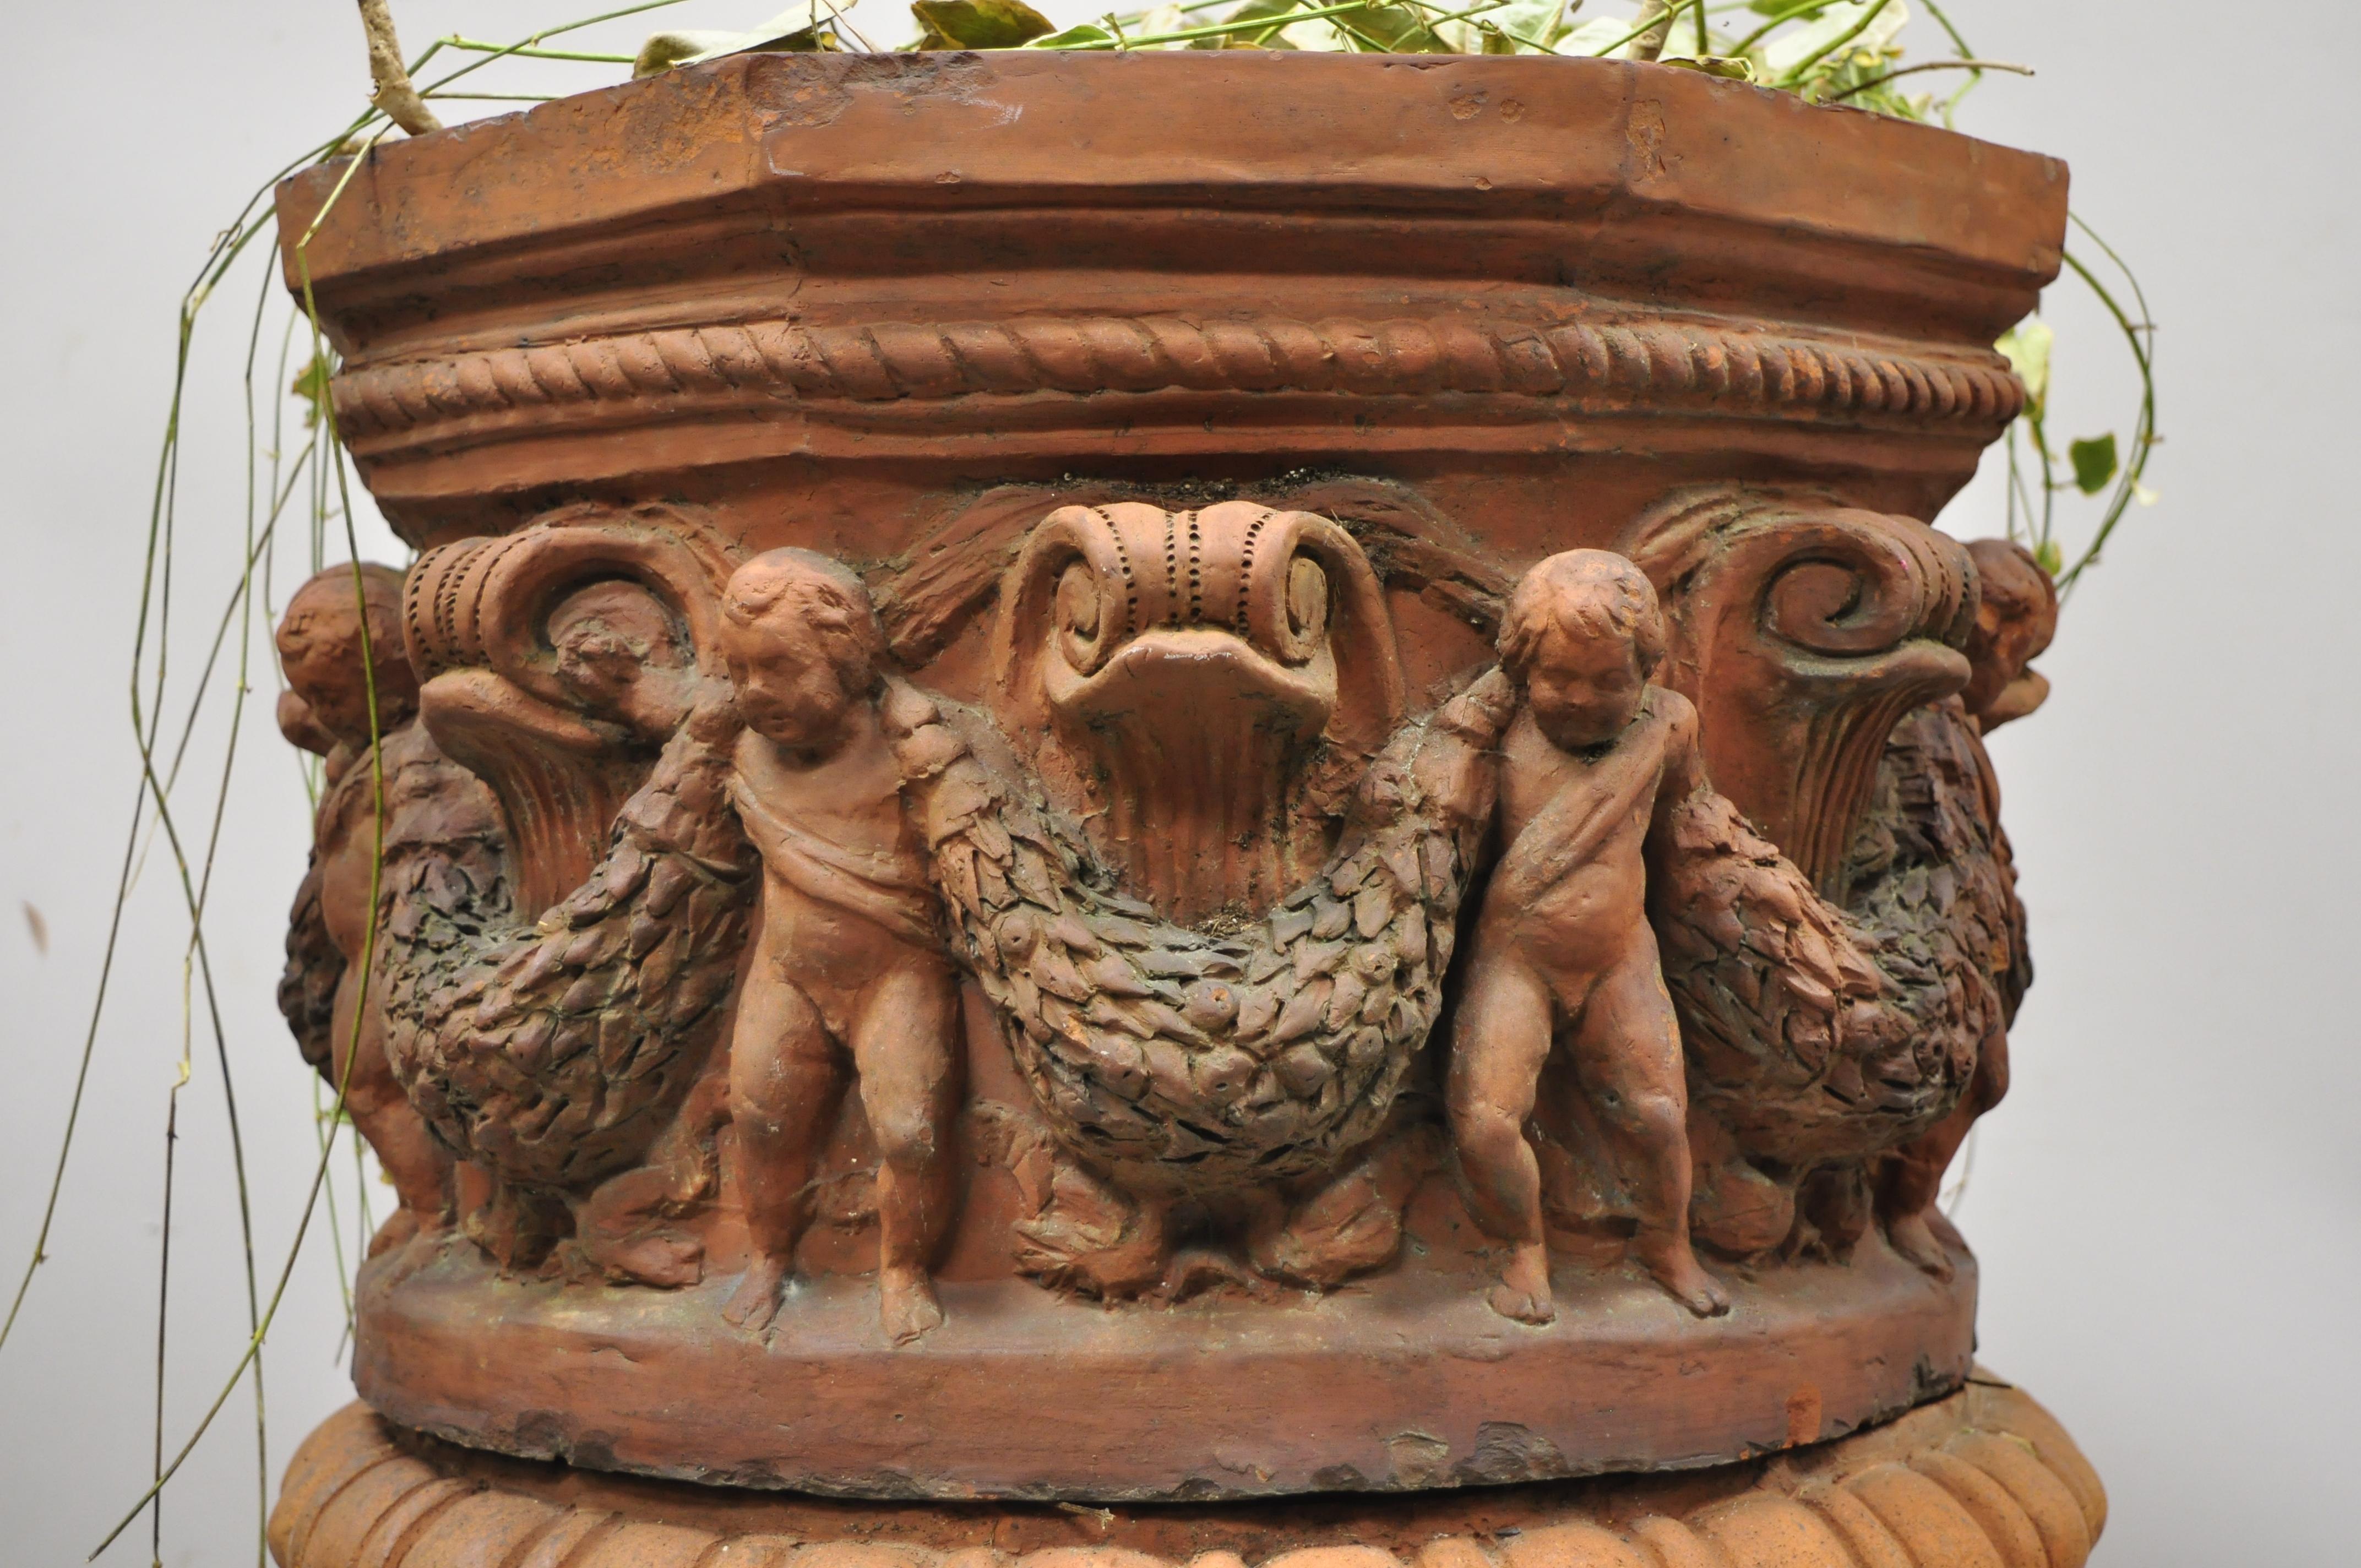 Antique classical terracotta garden pedestal planter pot with cherub figures. Item features pedestal base, ornate figural design with cherubs and faces, 2 part construction, great style and form, circa early to mid-1900s. Measurements: 29.5